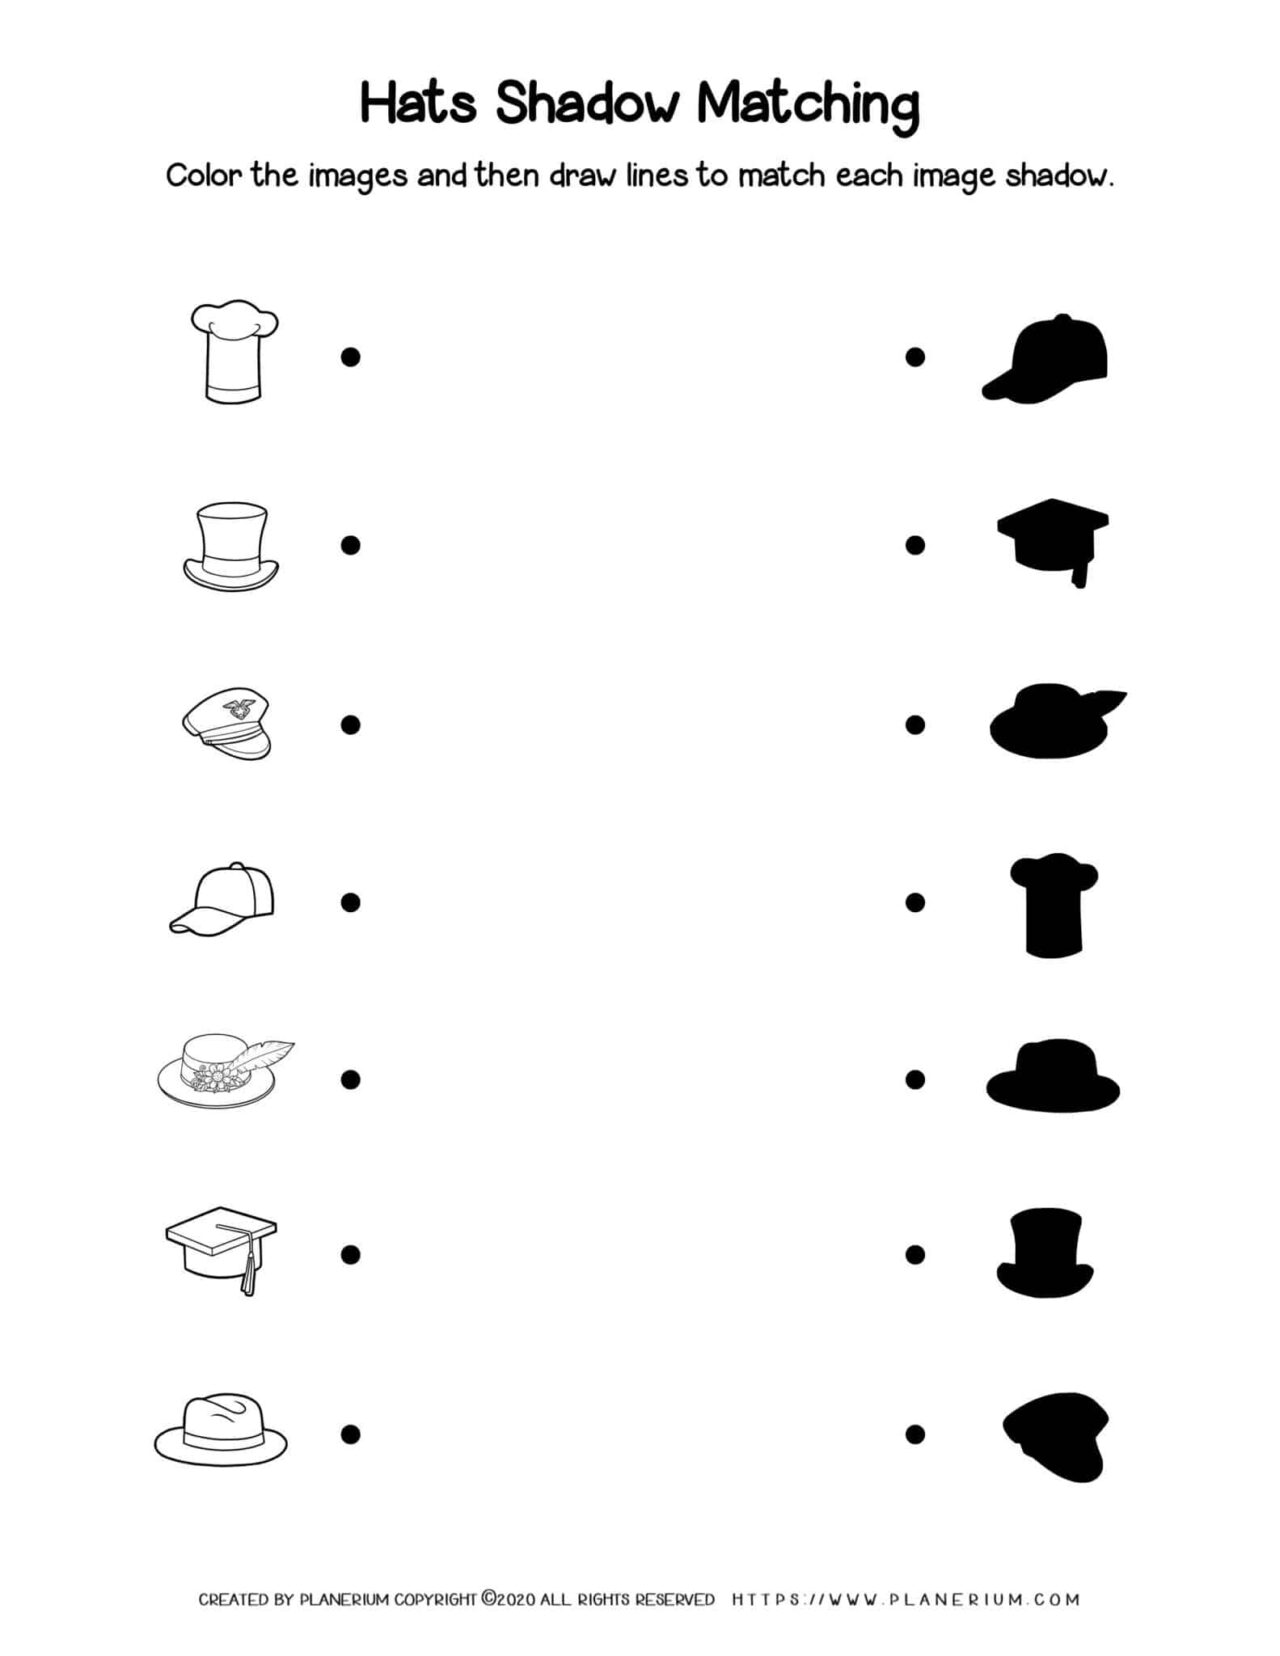 Clothes Worksheet - Hats Shadow Matching | Planerium